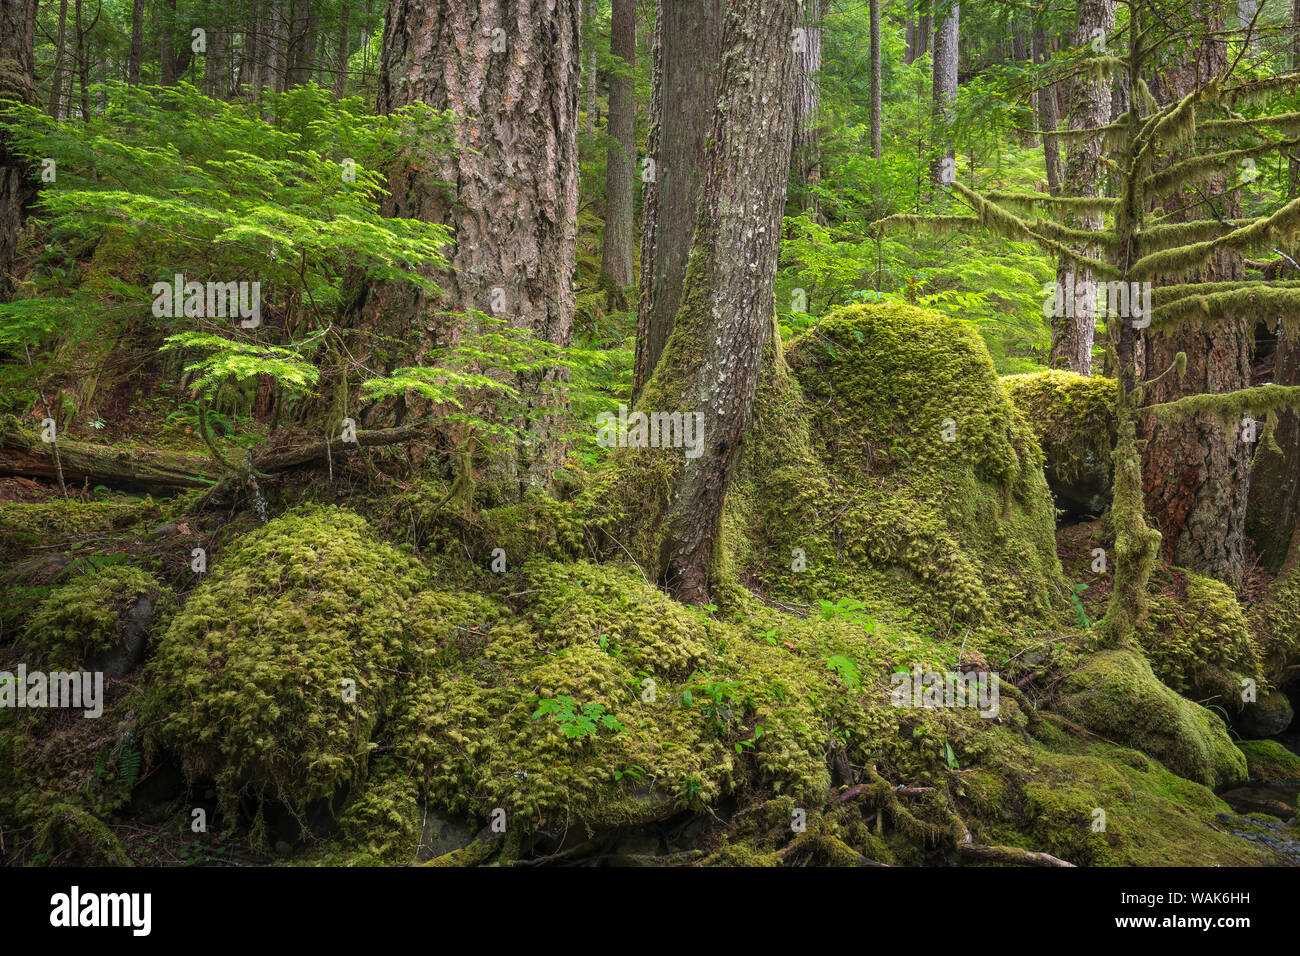 USA, Washington State, Olympic National Forest. Forest landscape. Credit as: Don Paulson / Jaynes Gallery / DanitaDelimont.com Stock Photo